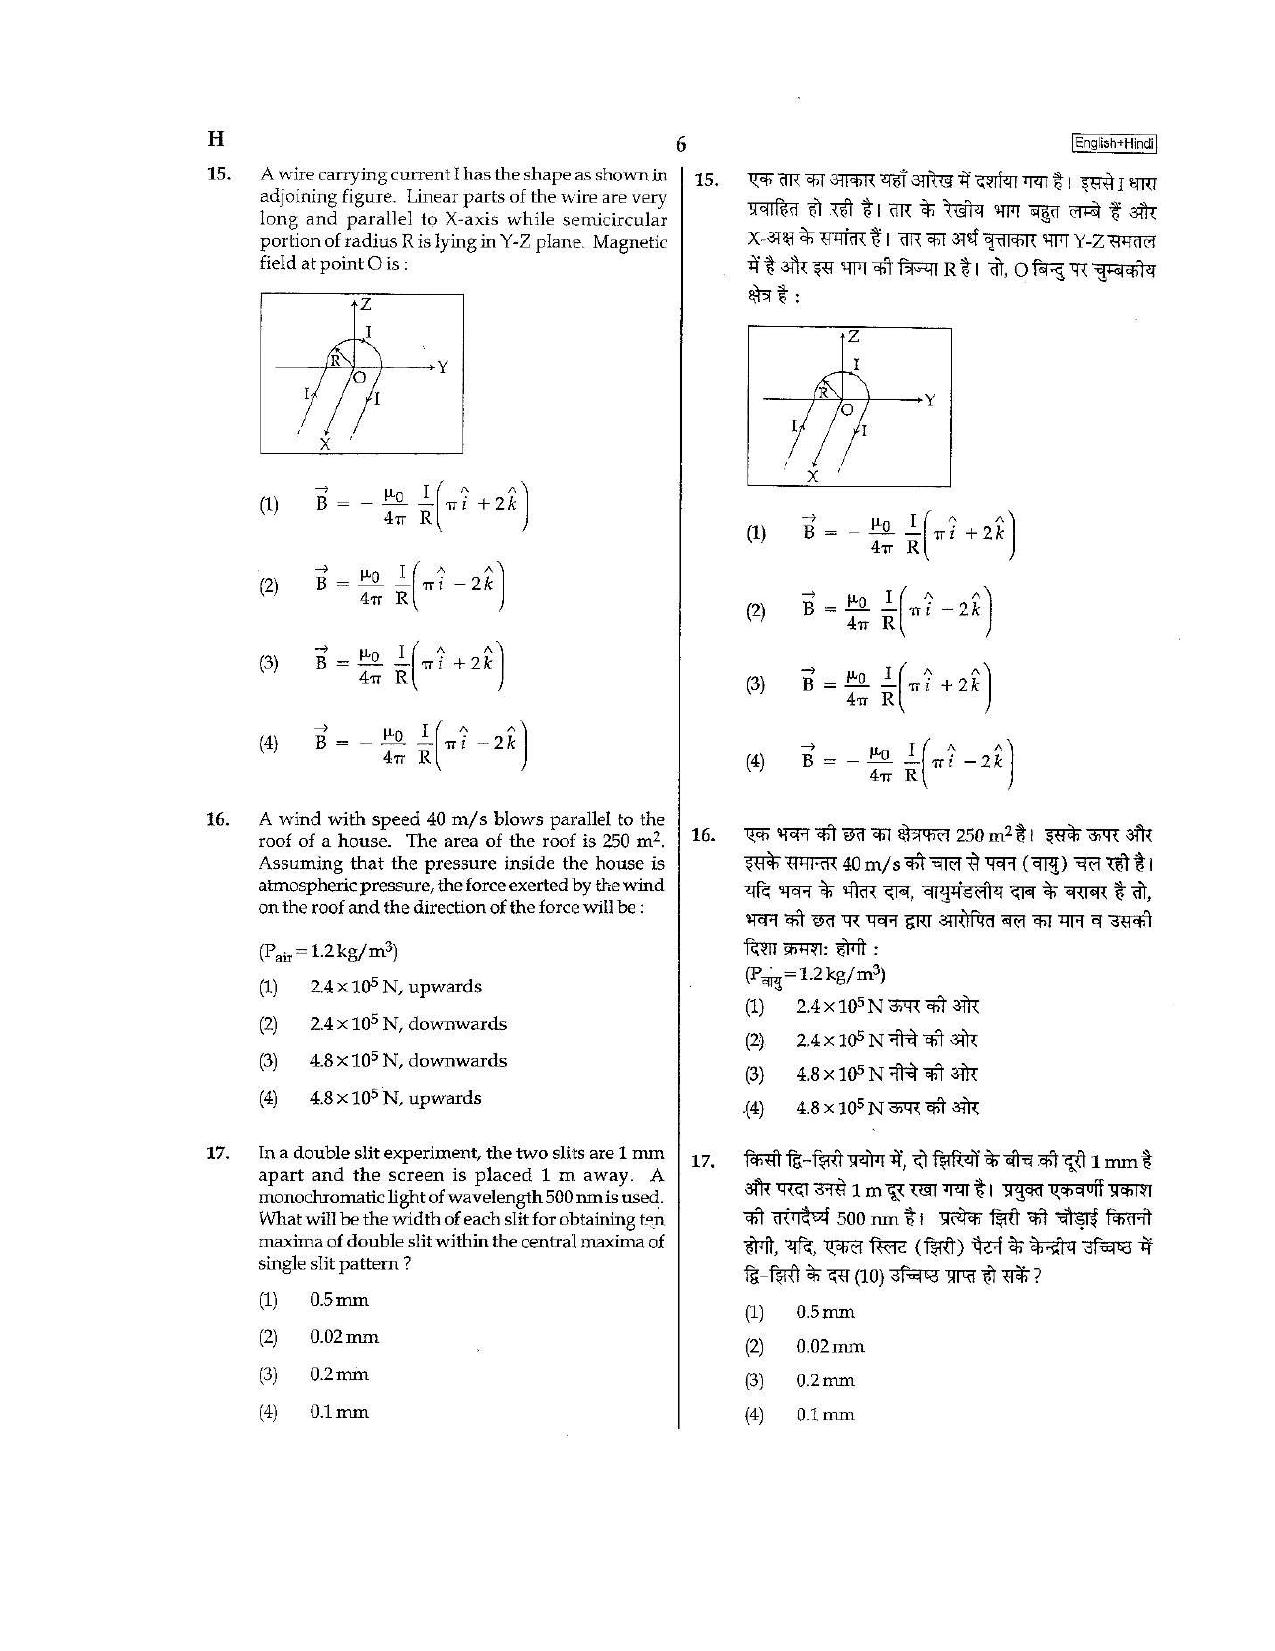 NEET Code H 2015 Question Paper - Page 6